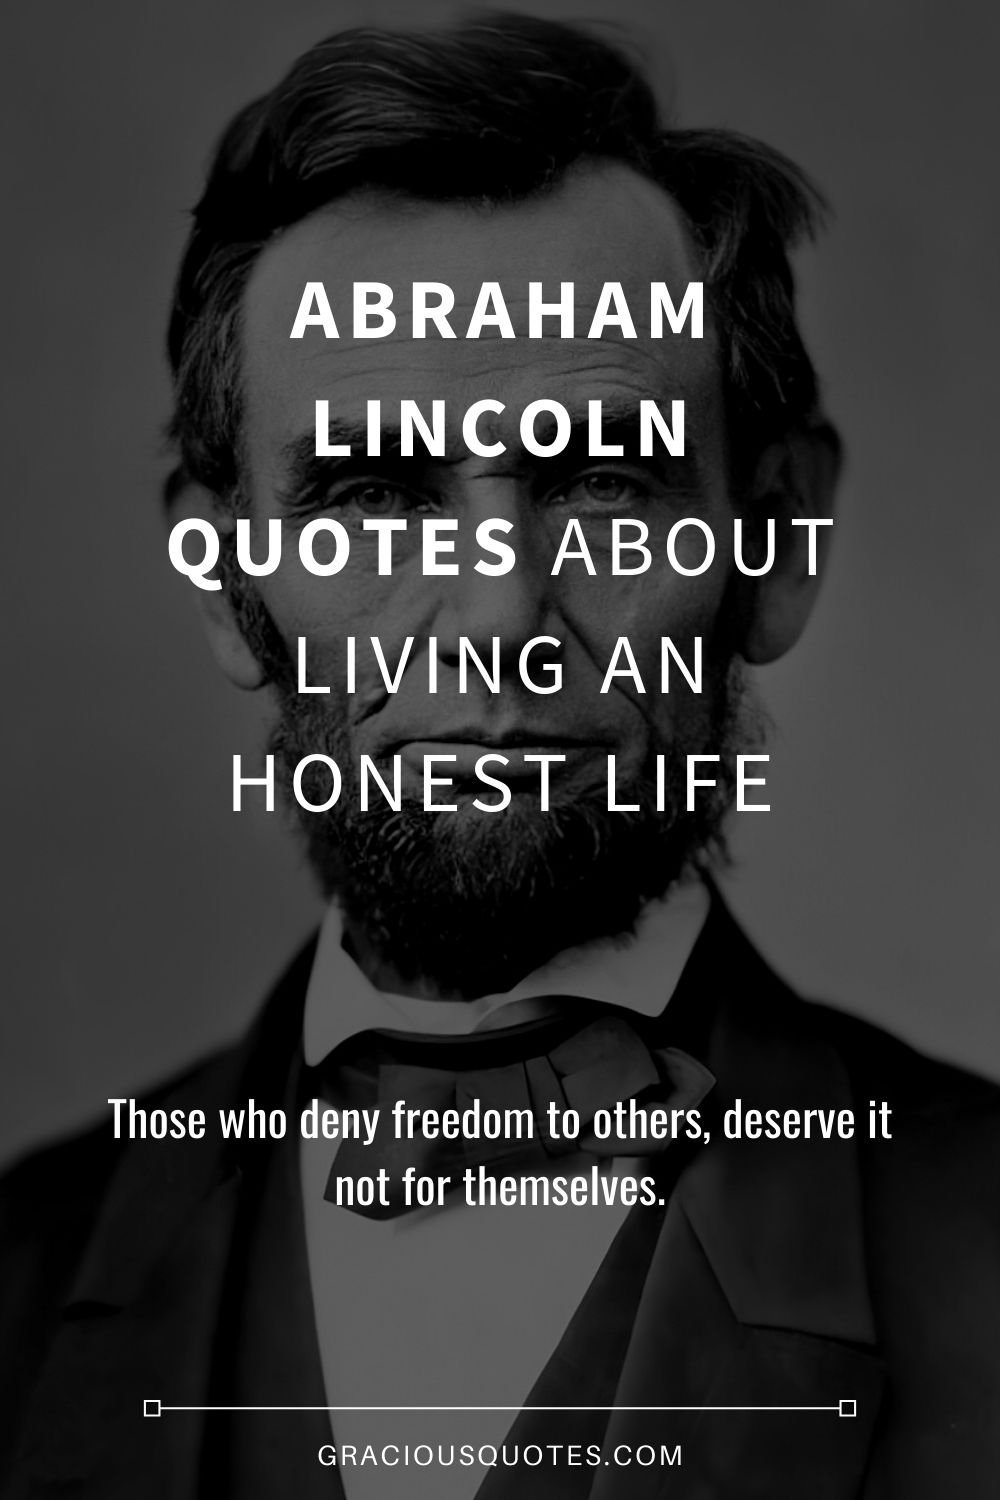 Abraham-Lincoln-Quotes-About-Living-an-Honest-Life-Gracious-Quotes